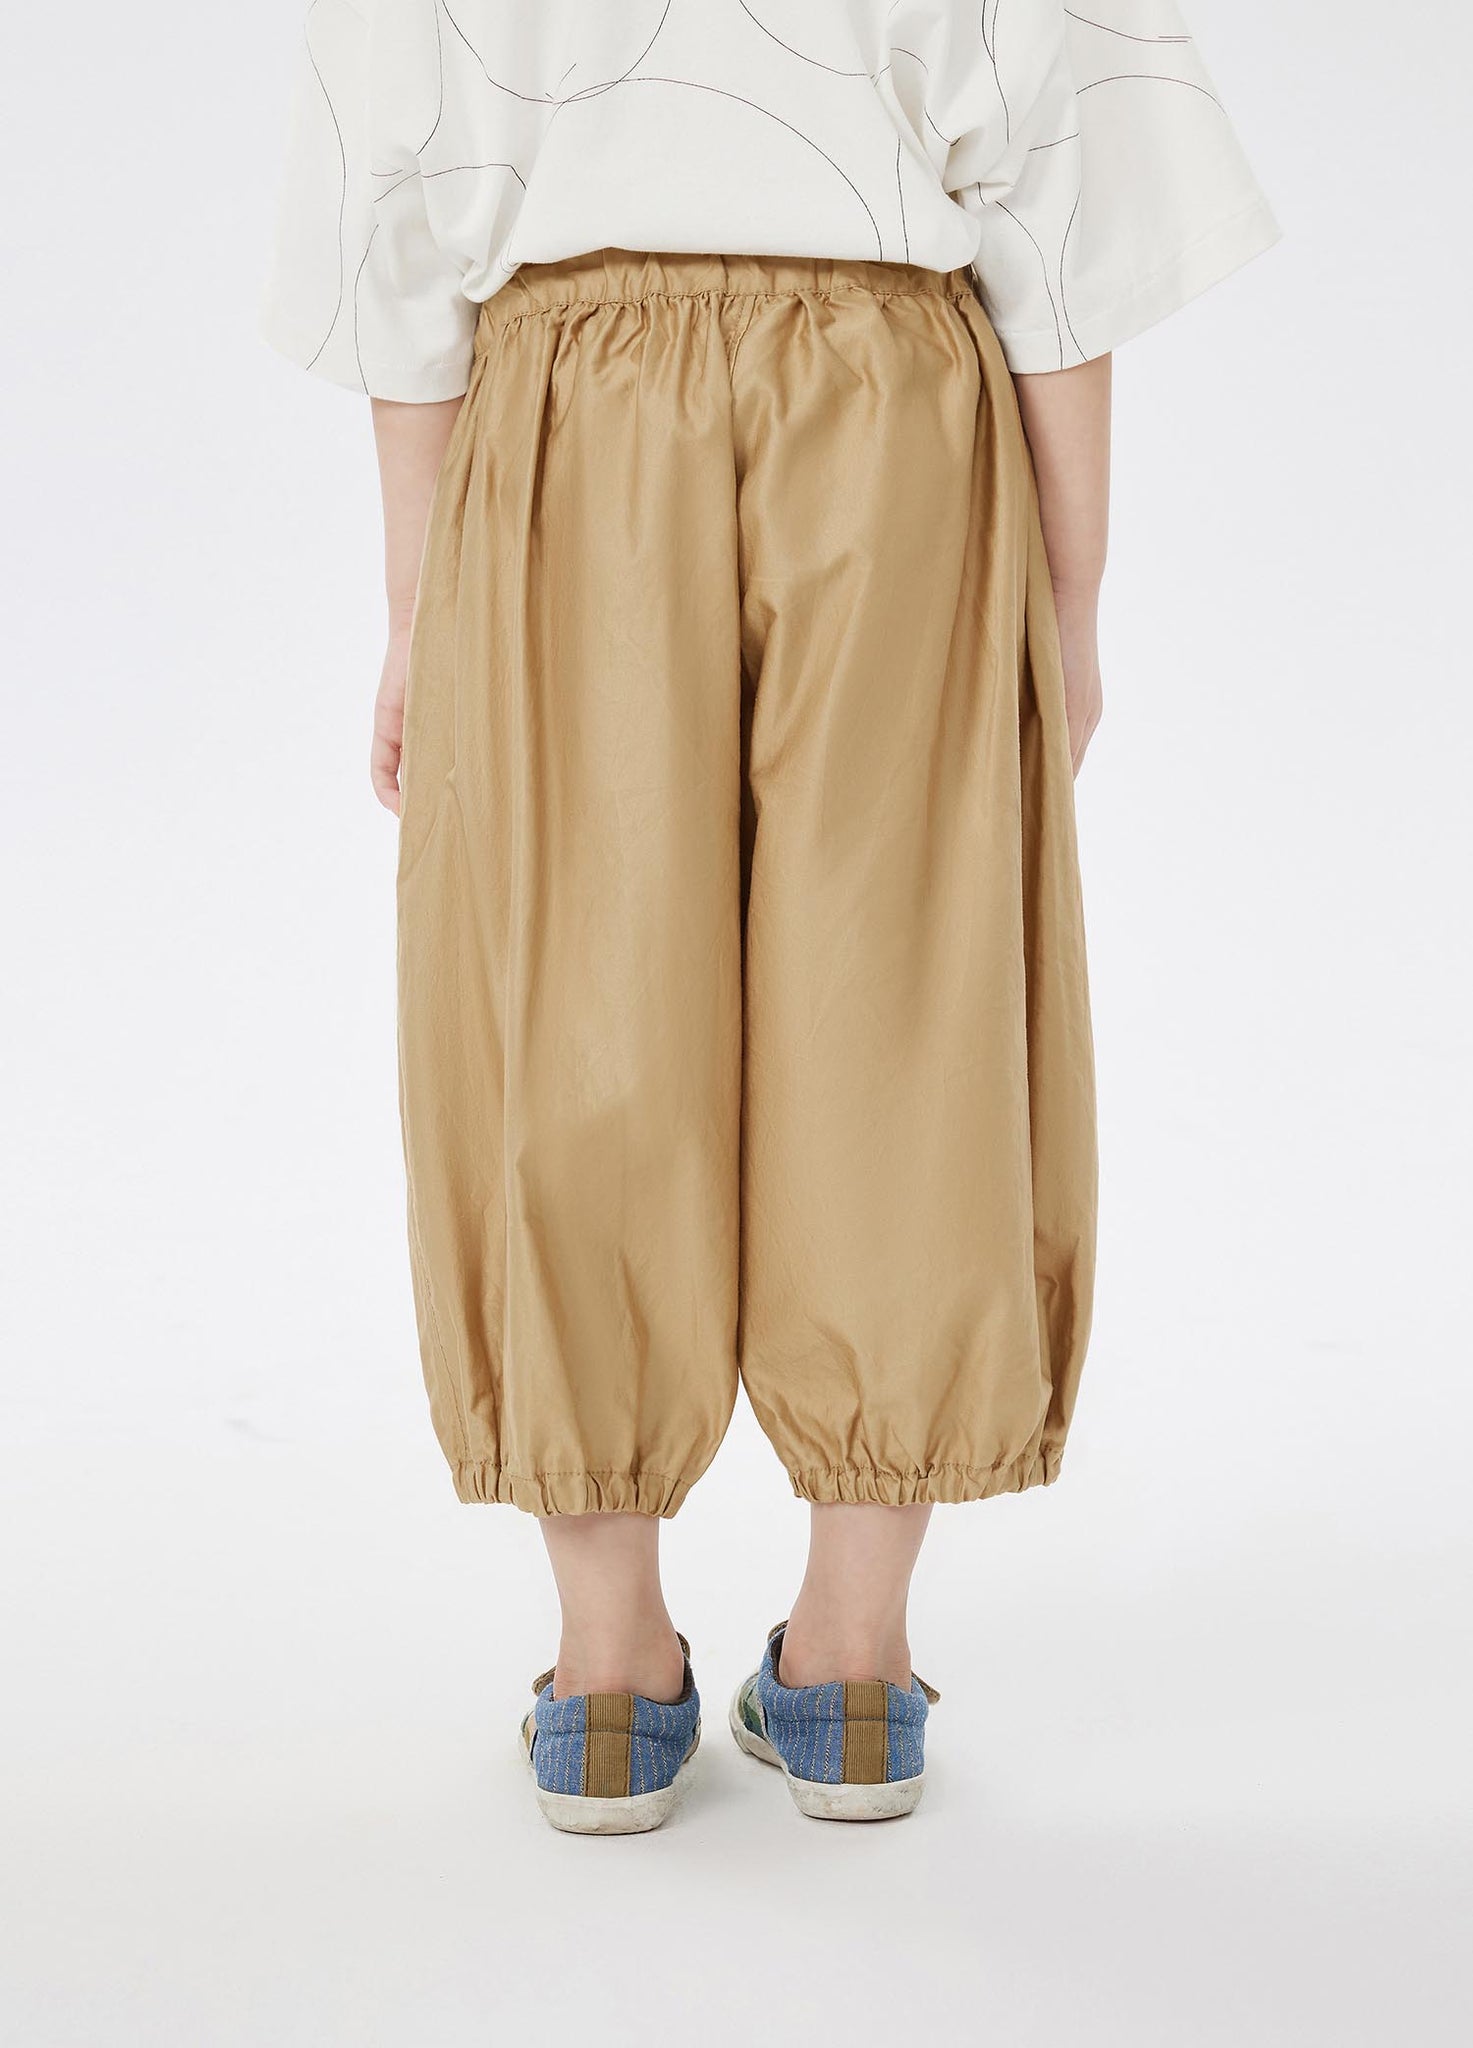 Pants / jnby by JNBY Cropped Pants